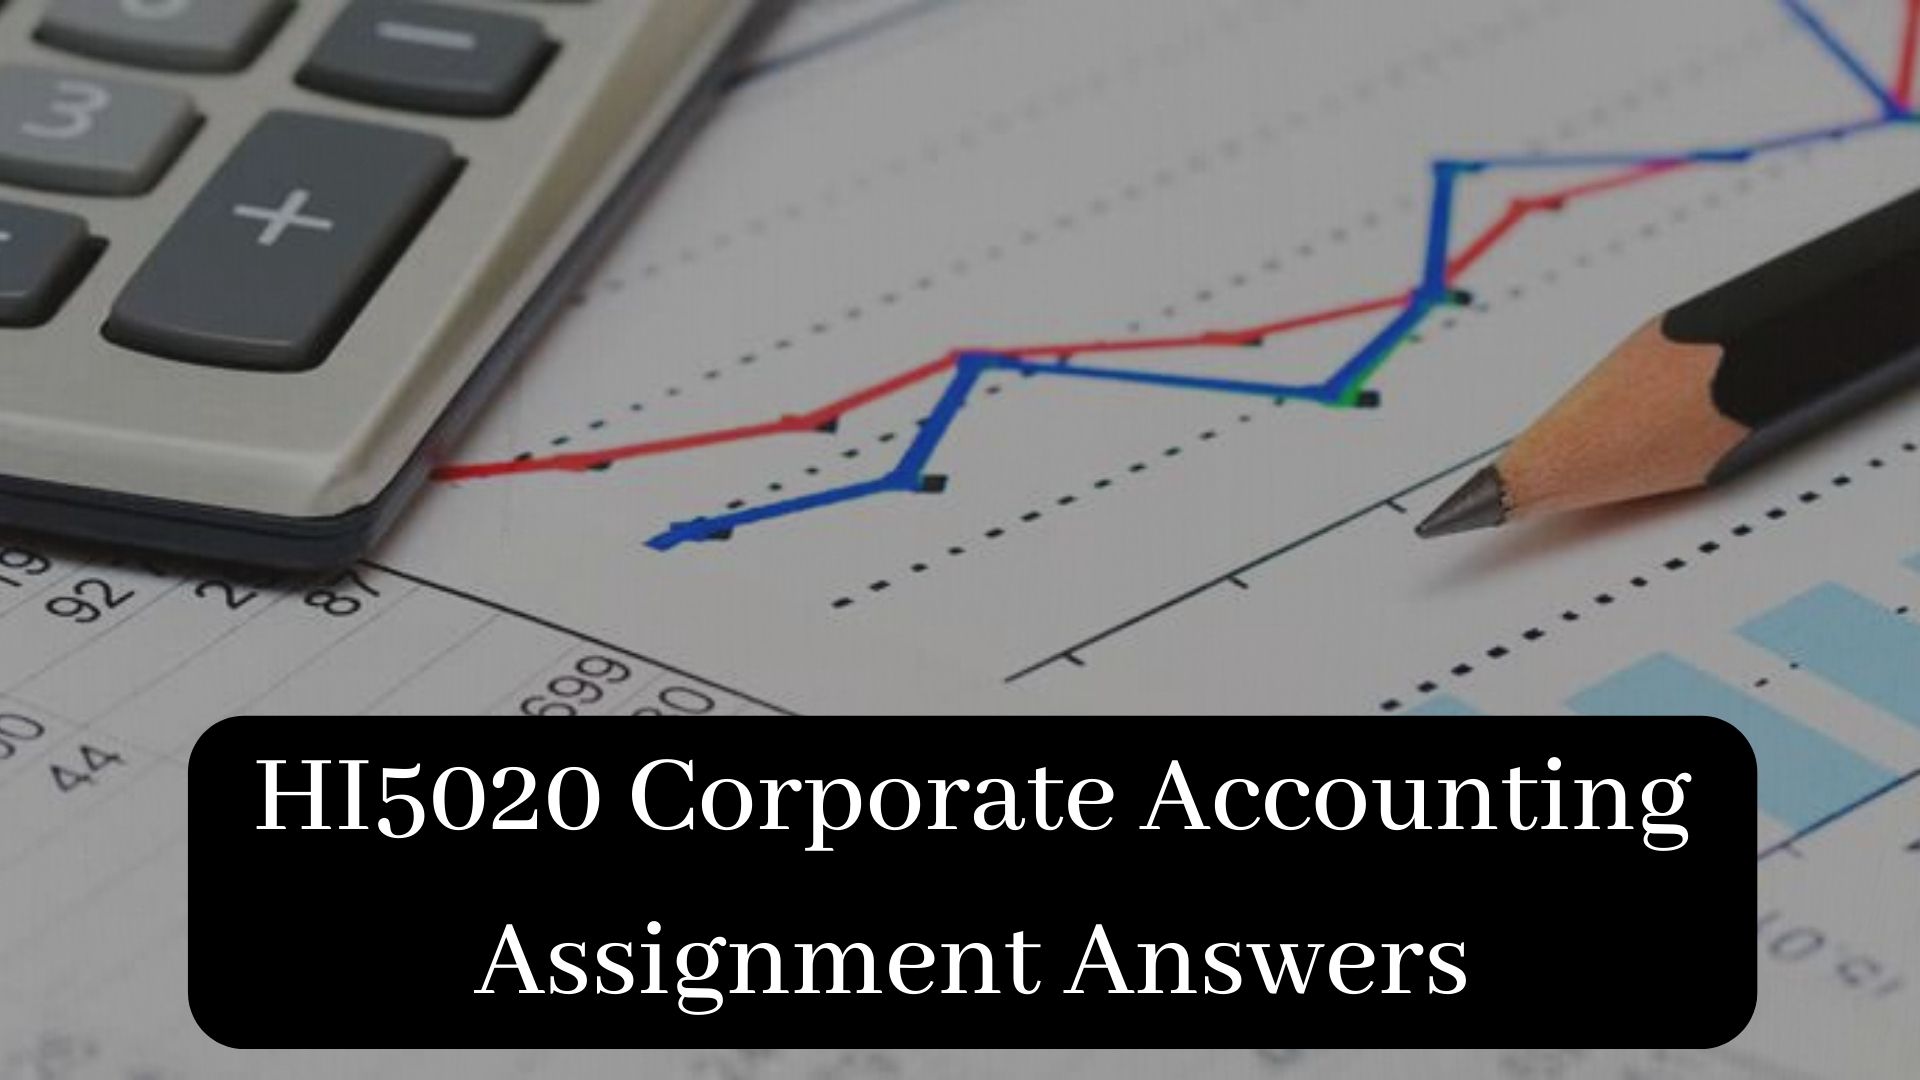 HI5020 Corporate Accounting Assignment Answers